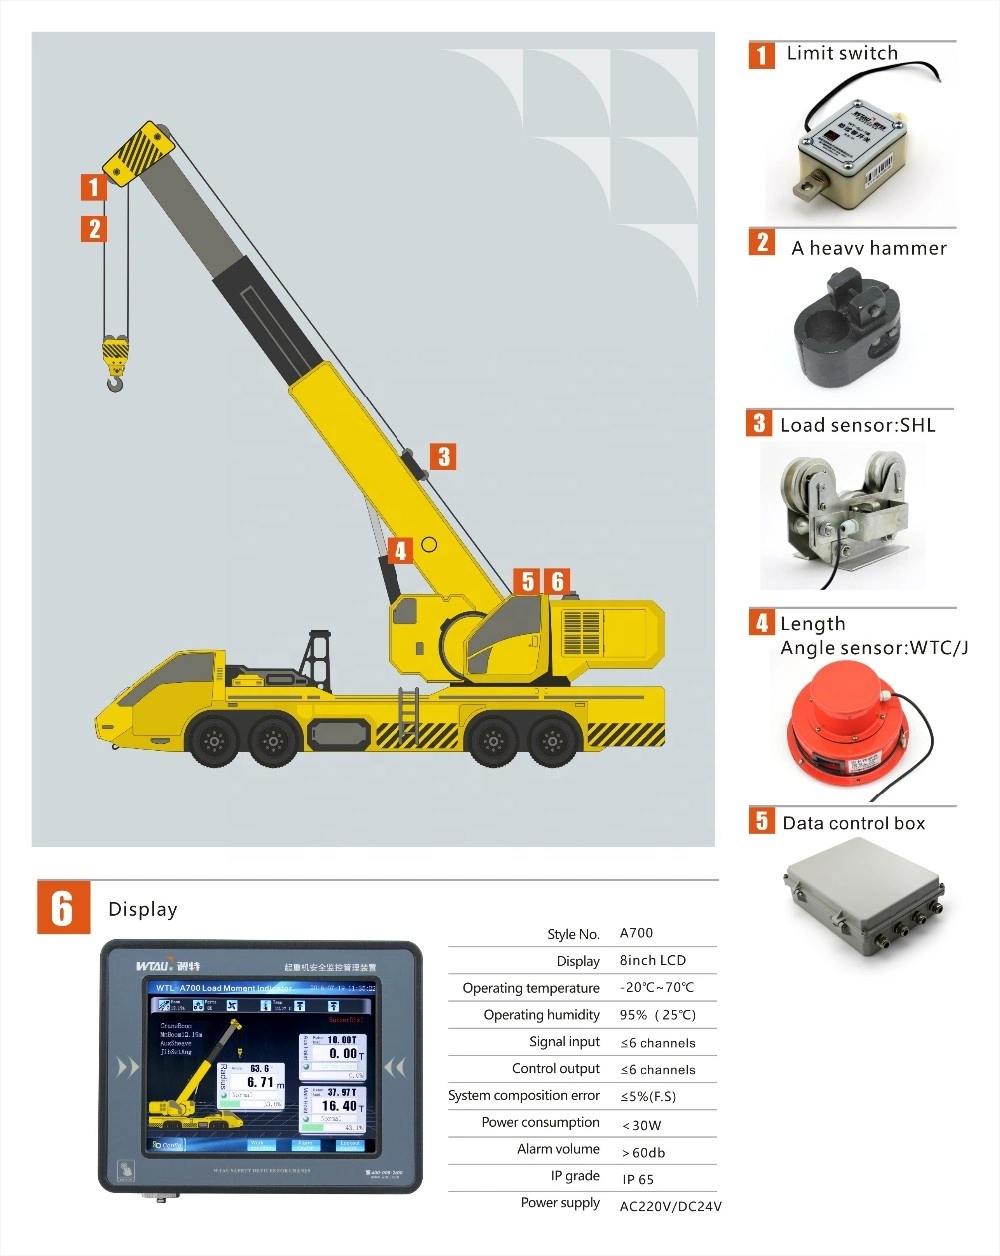 P&H 35t Mobile Crane Loading System with Load Cell Indicator for Crane Safety